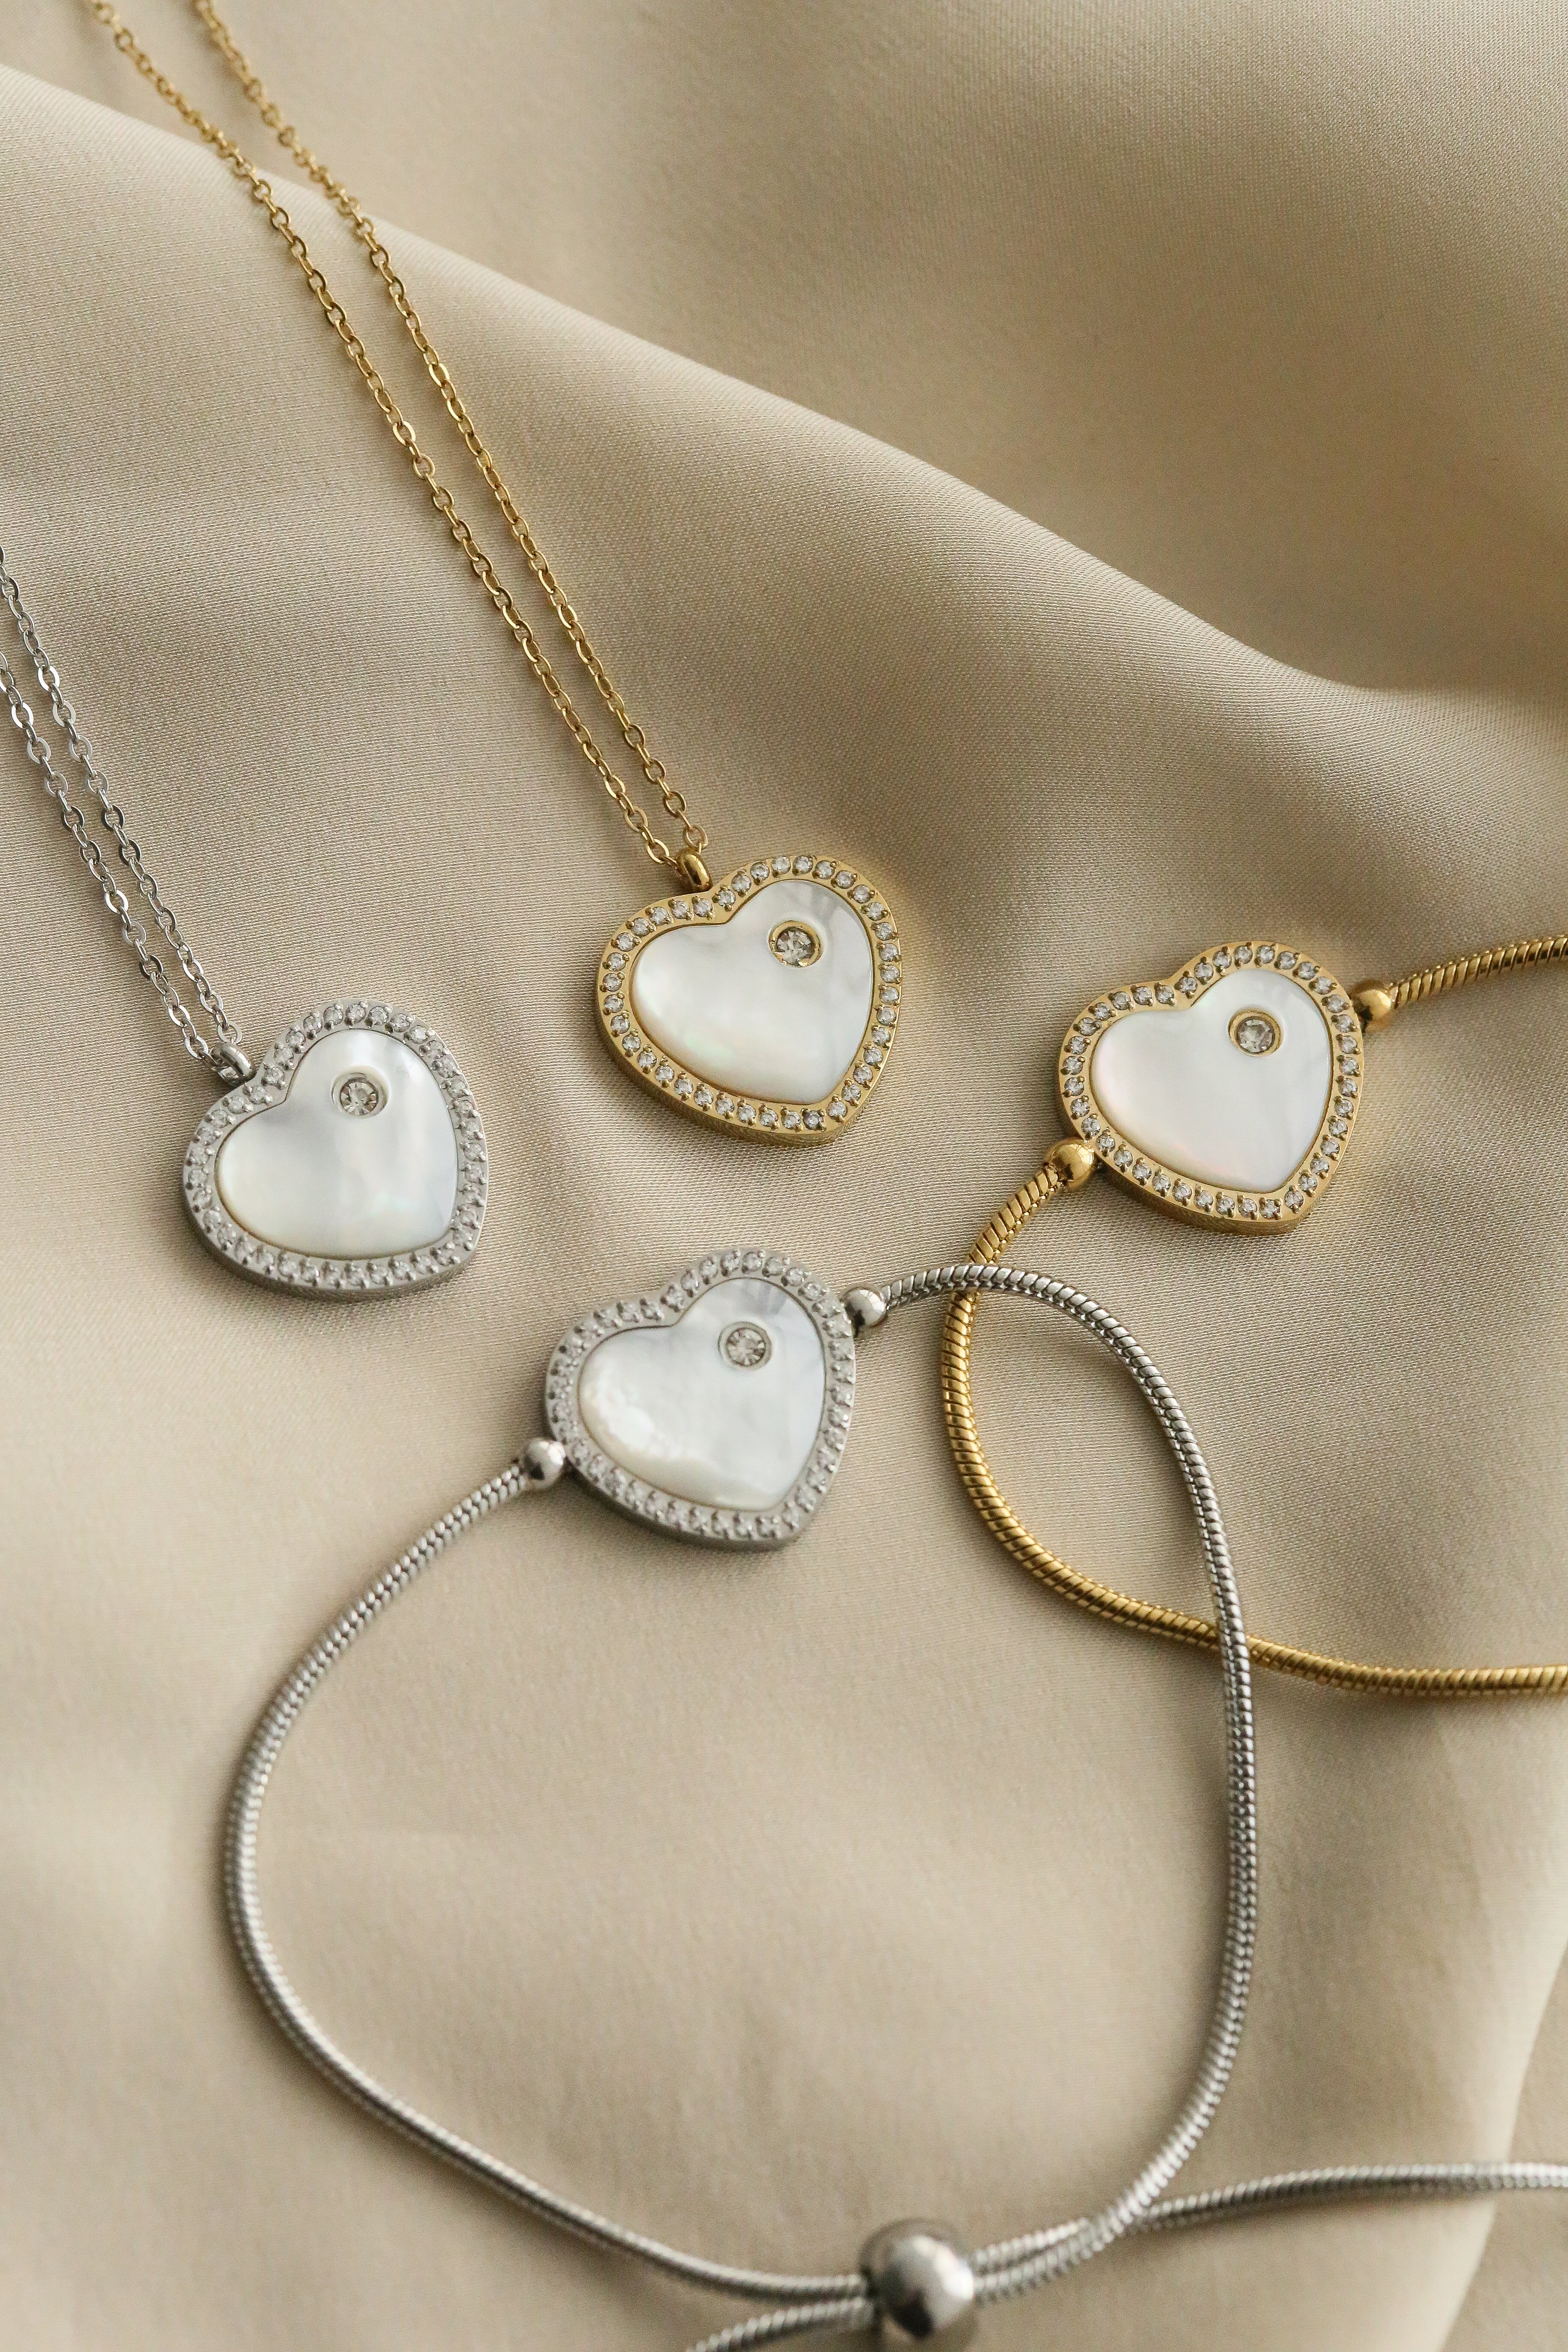 Rue Necklace - Boutique Minimaliste has waterproof, durable, elegant and vintage inspired jewelry